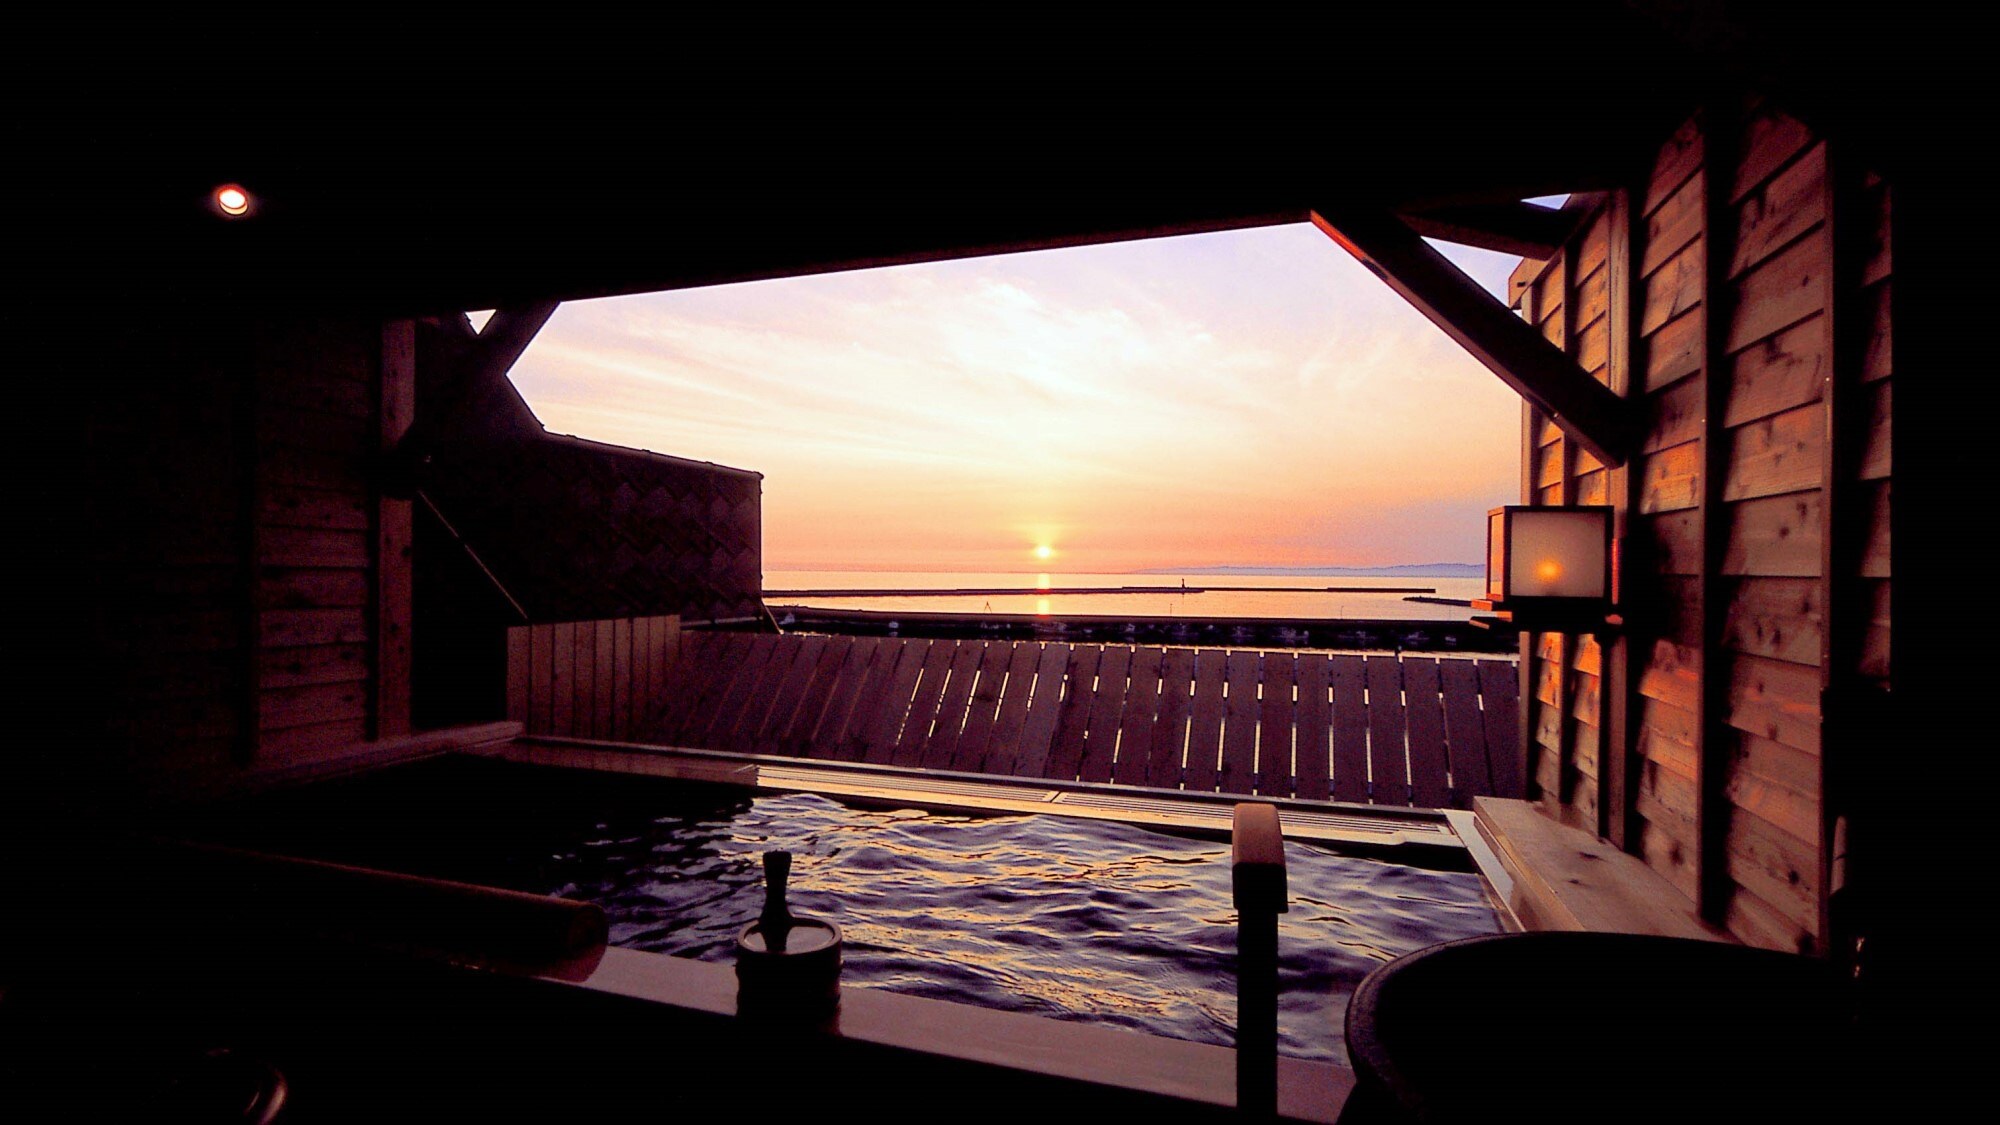 [Open-air cypress bath] A relaxing time to soak while watching the sunset on the horizon.